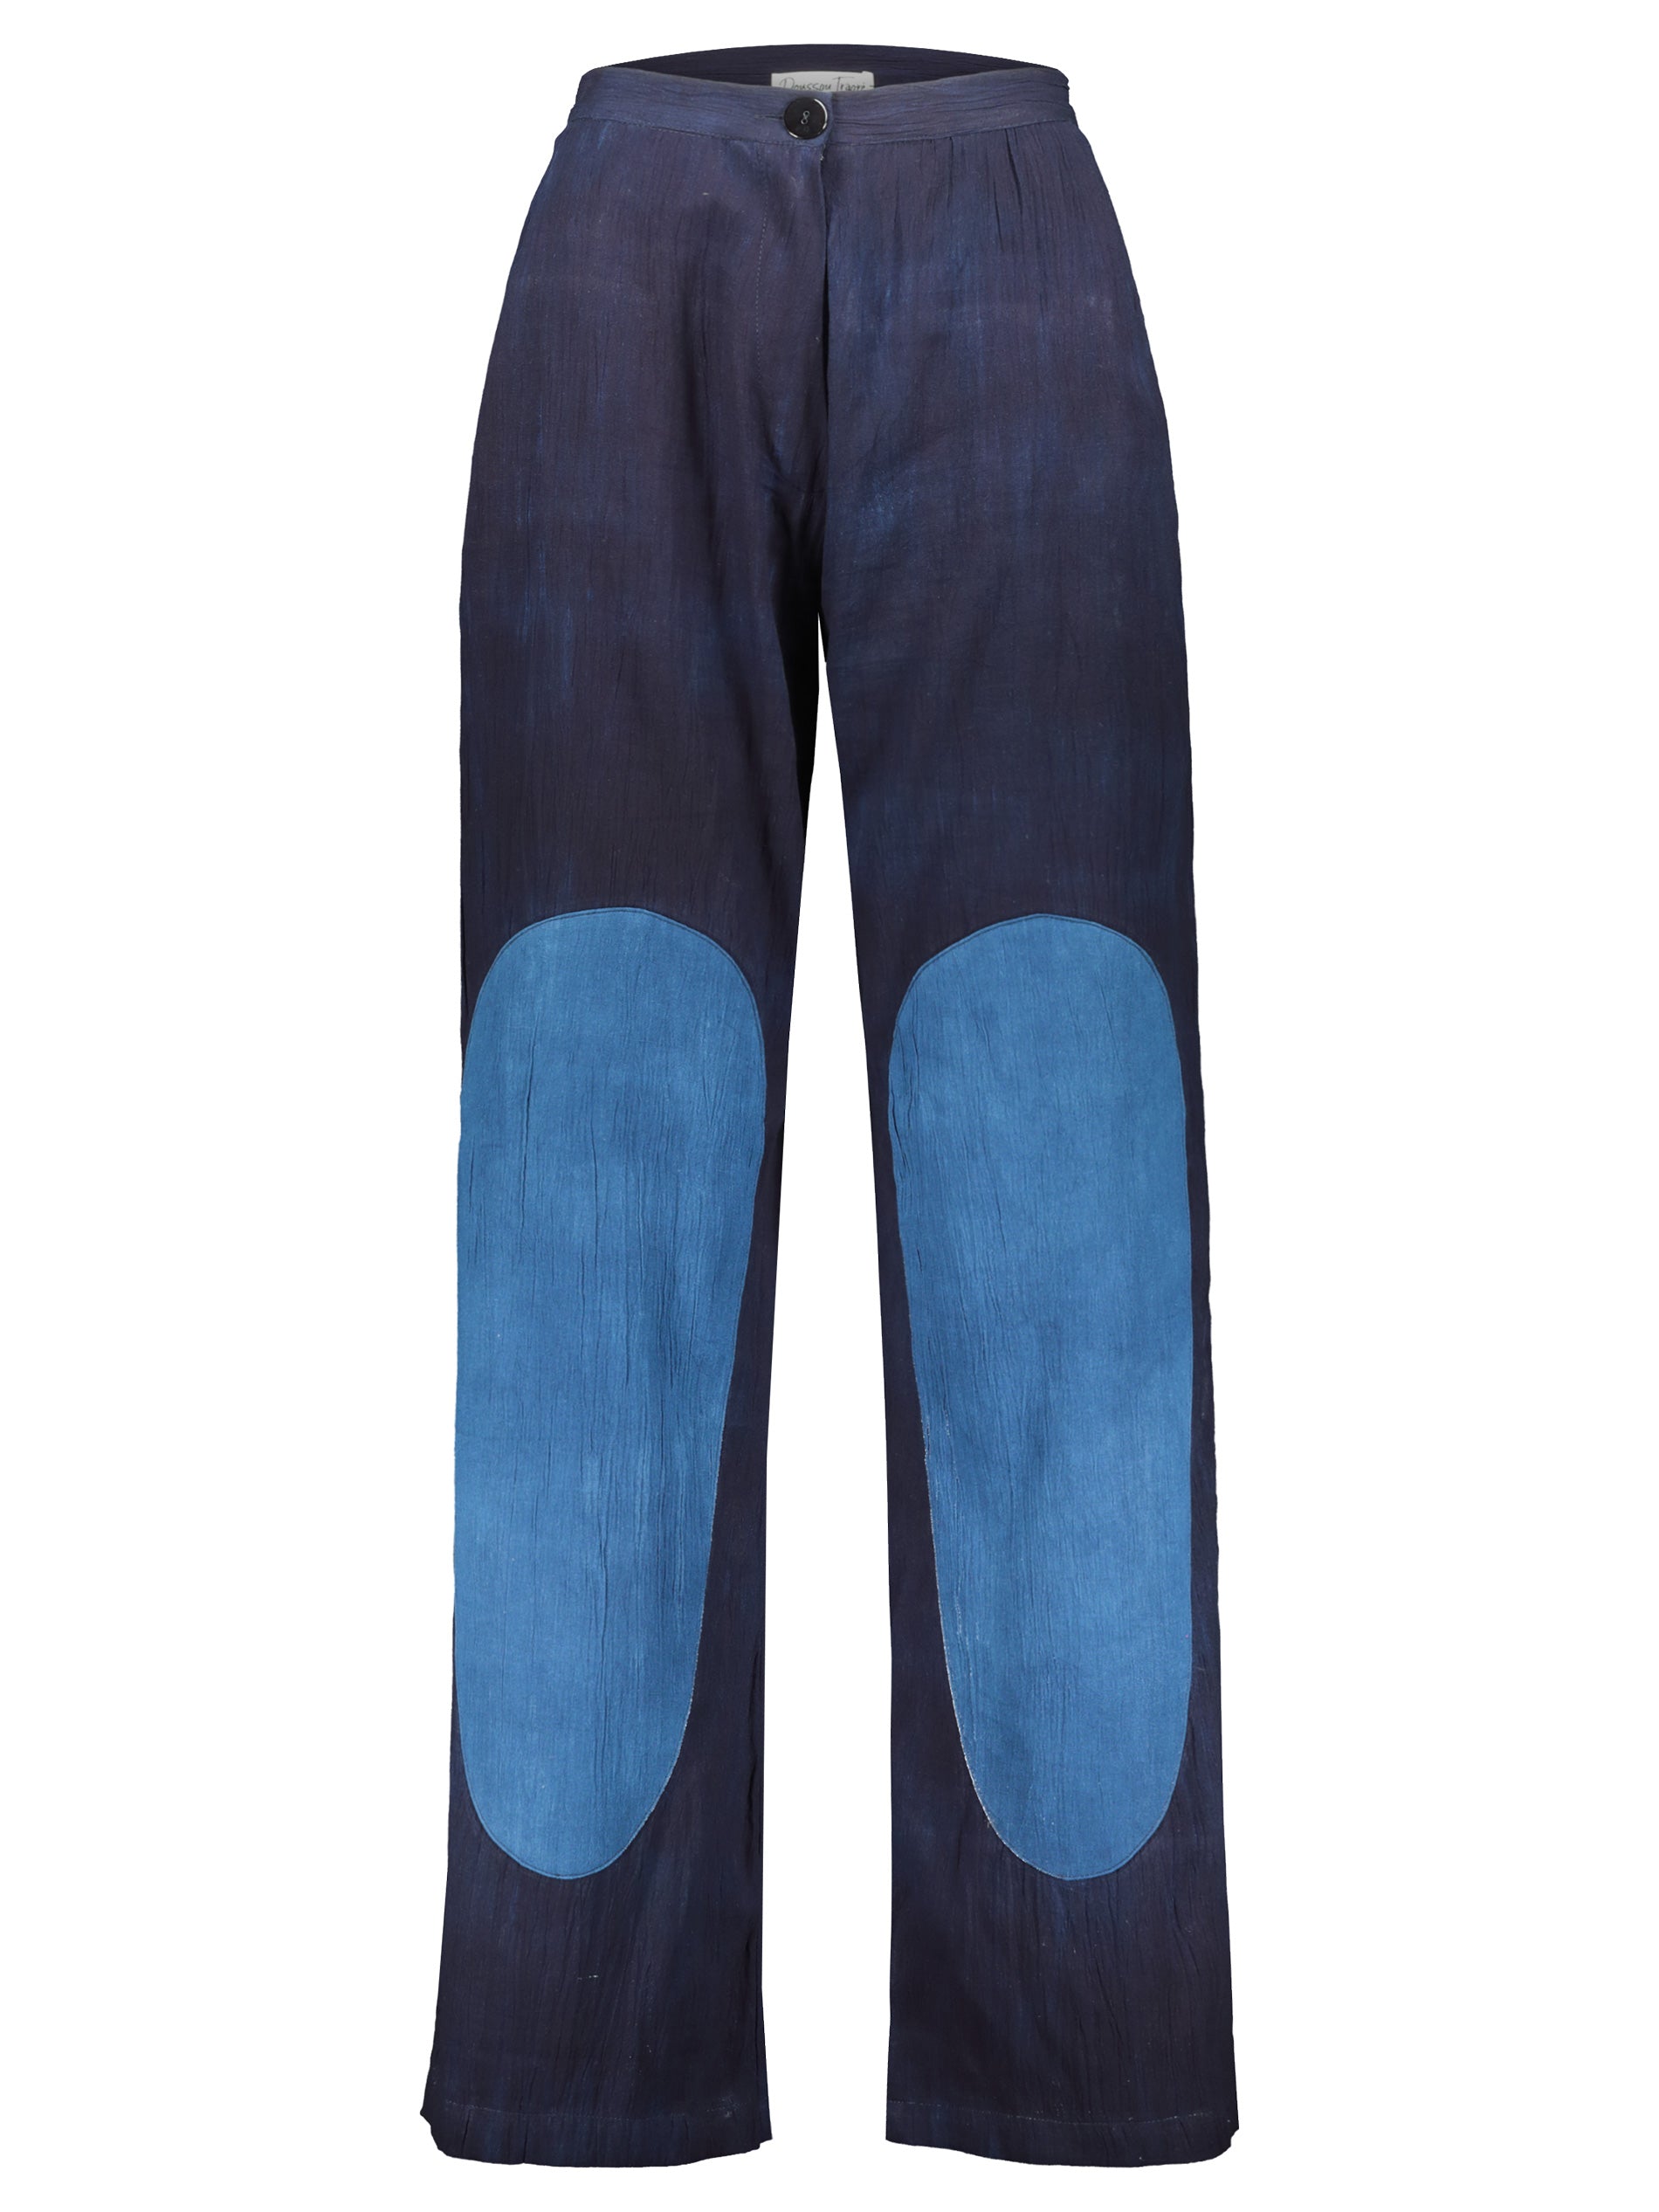 Patched Indigo Tones Trousers